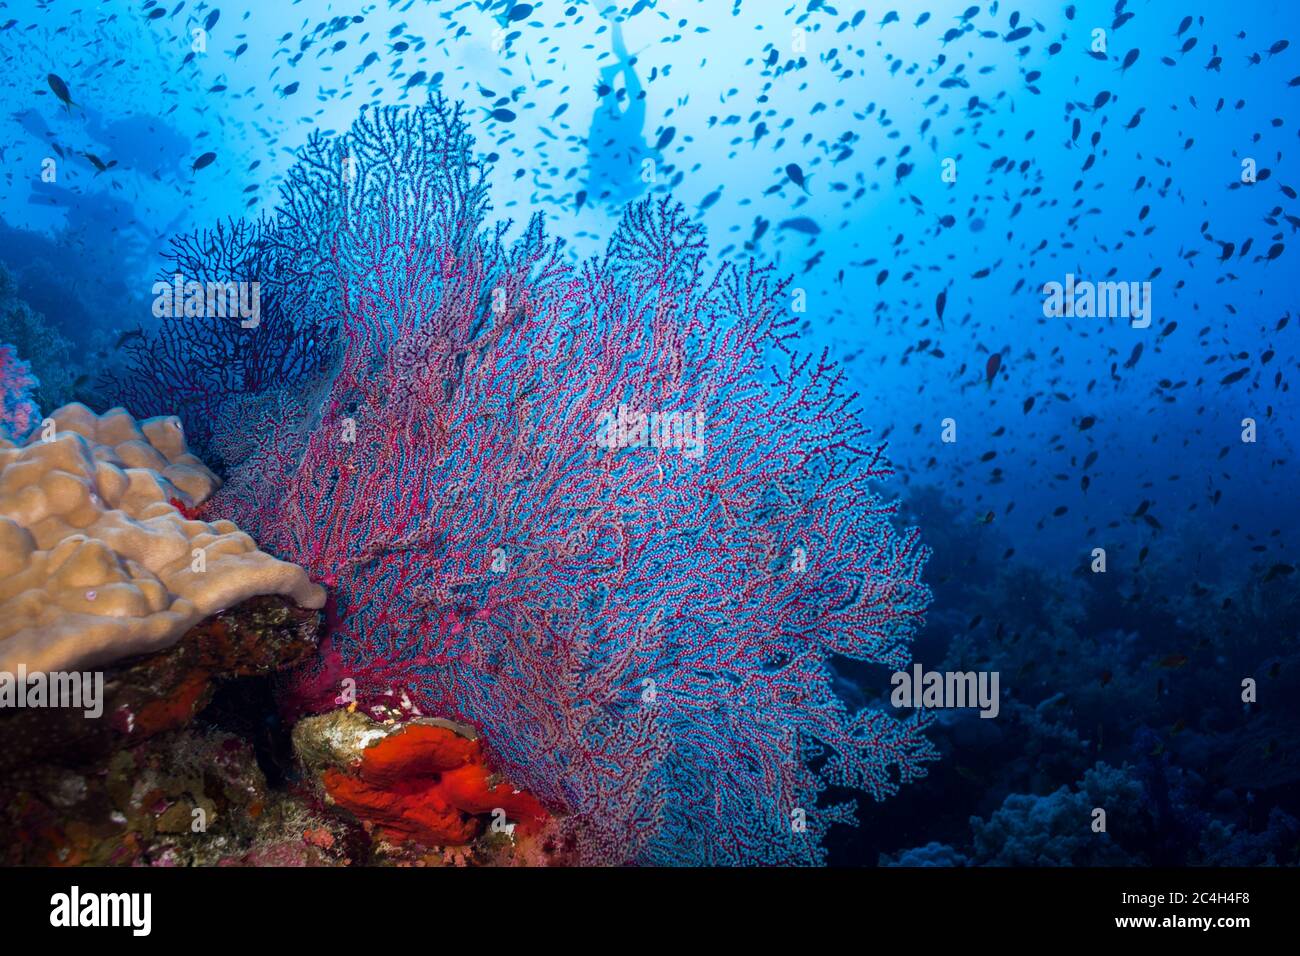 Colorful coral reef surrounded with small fish and silhouettes of divers in the background Stock Photo